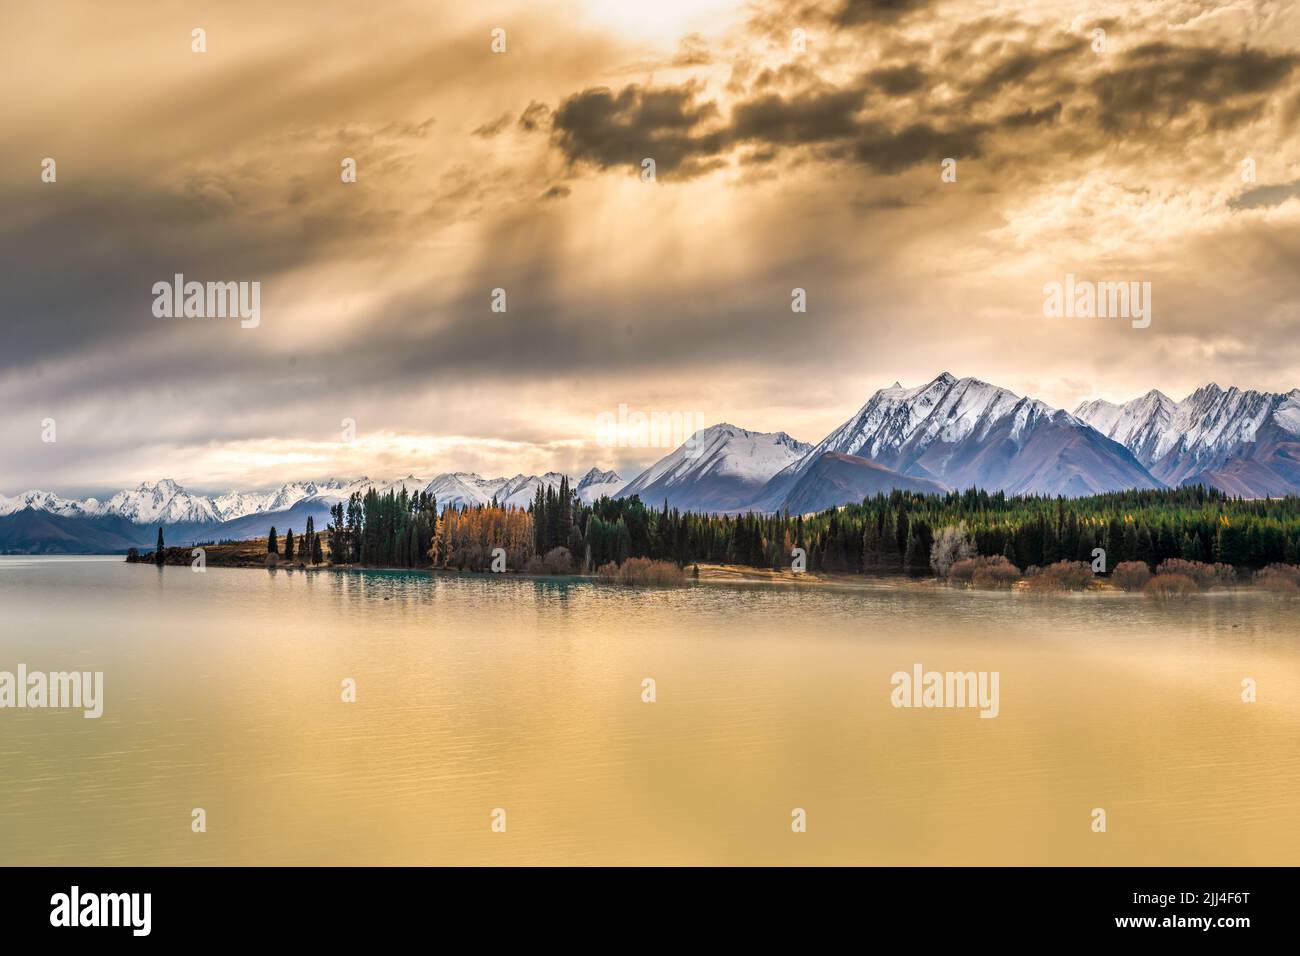 The snow capped Southern alps mountain range at Lake Tekapo under eerie weather conditions Stock Photo